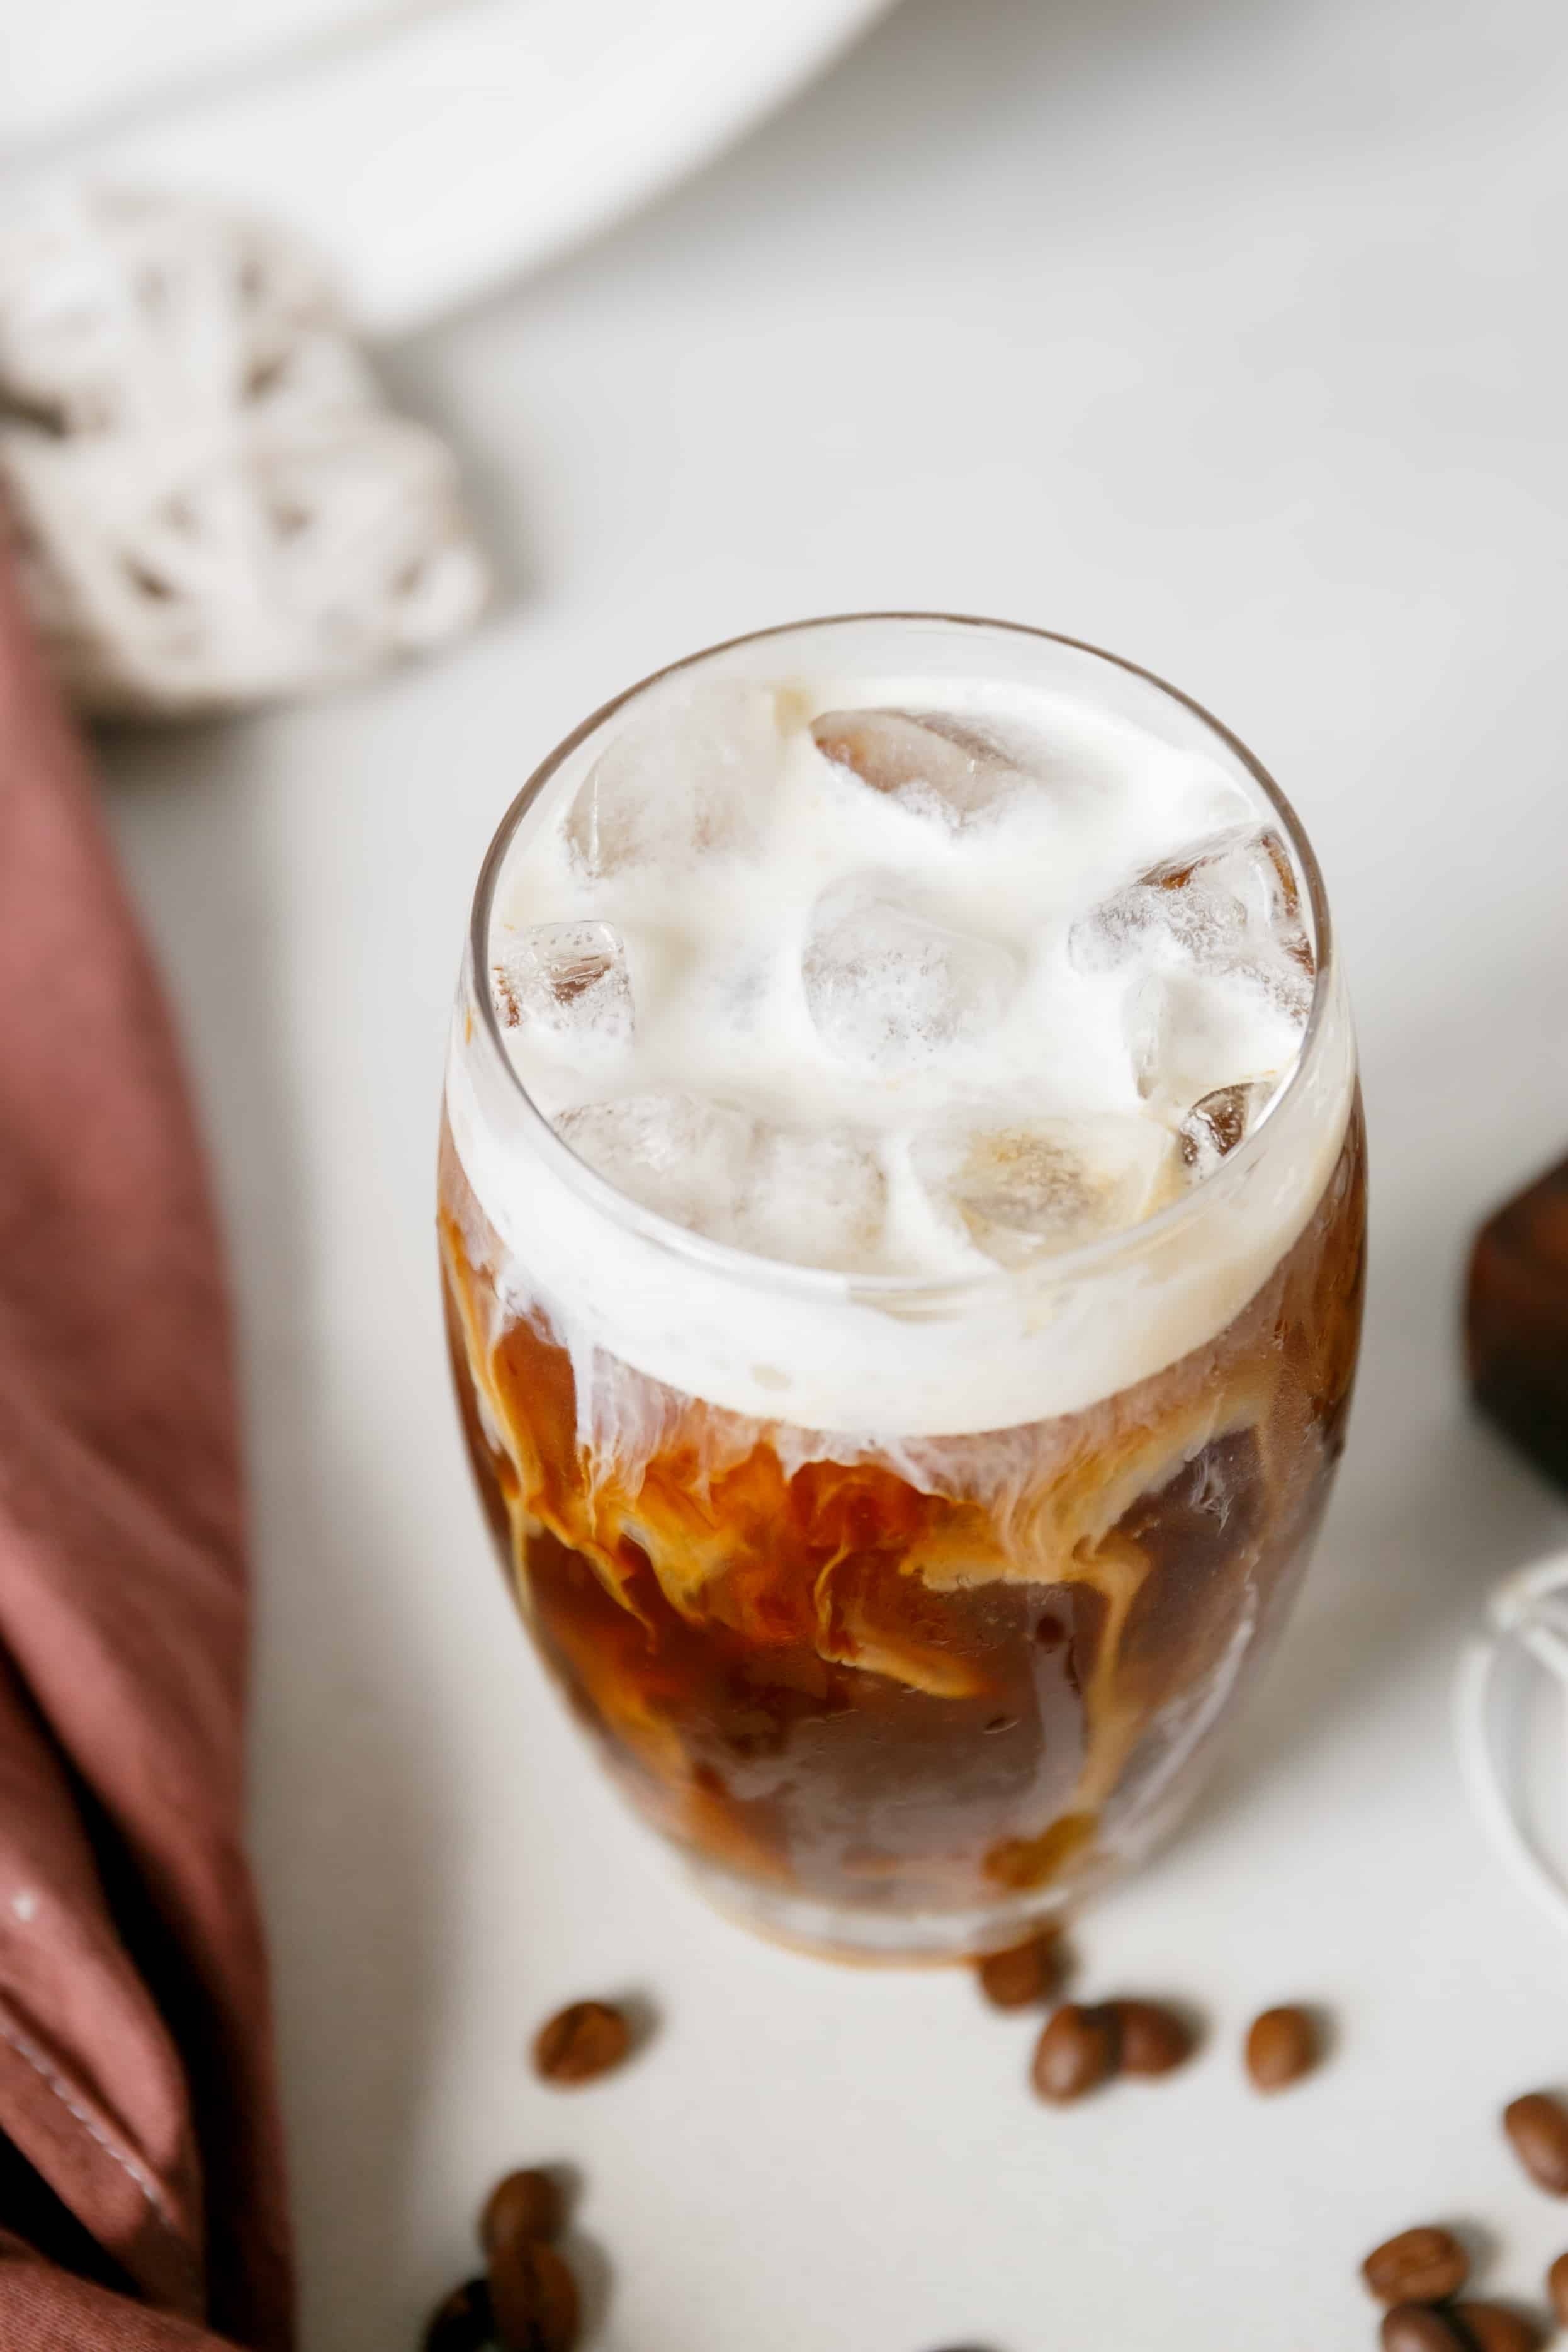 Salted Maple Cold Brew Coffee - The Schmidty Wife